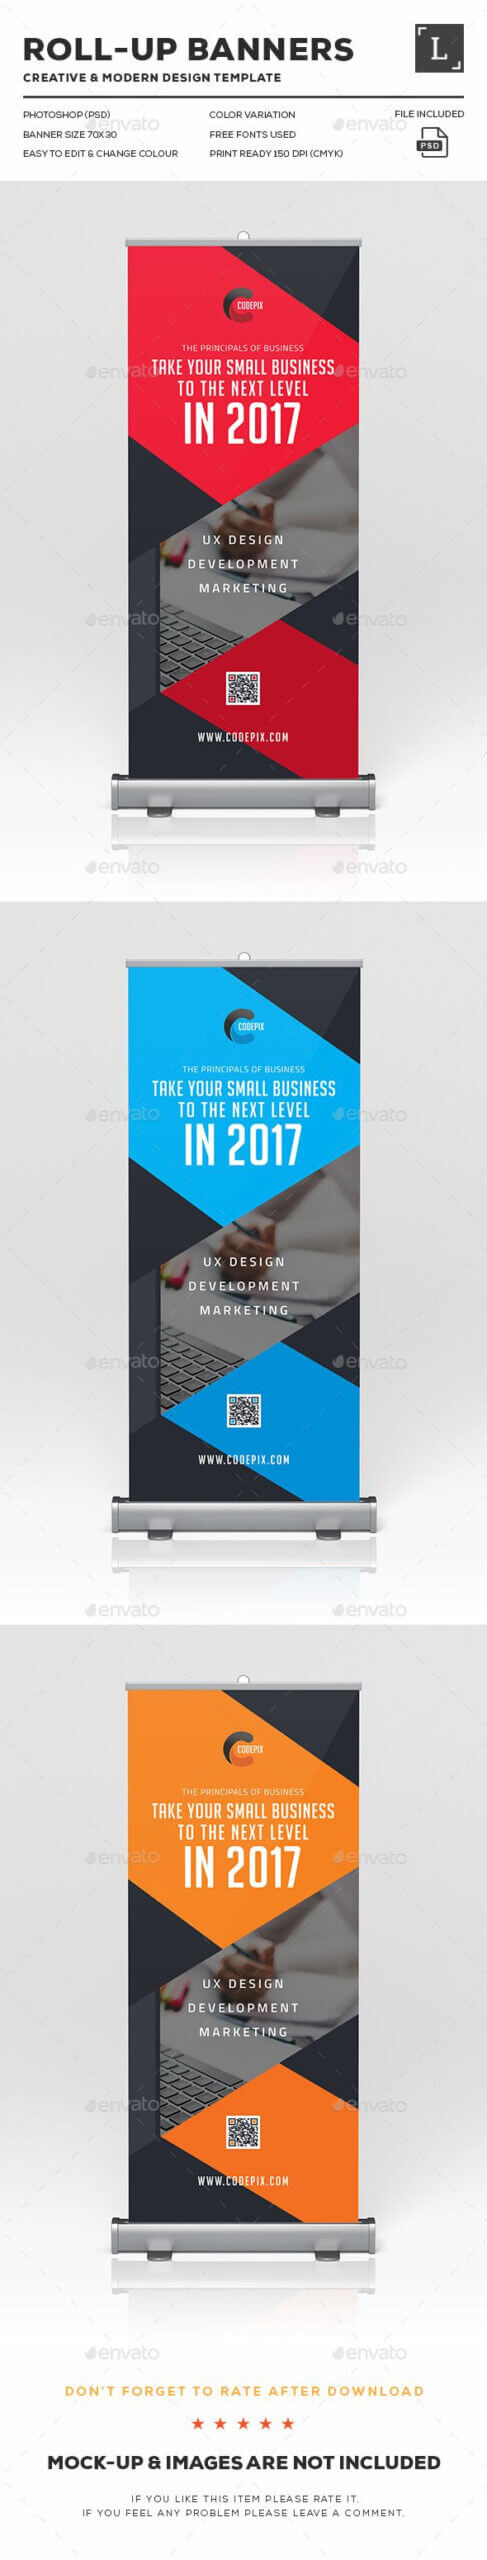 Corporate Roll Up Banner Design Template – Signage Print Regarding Vinyl Banner Design Templates